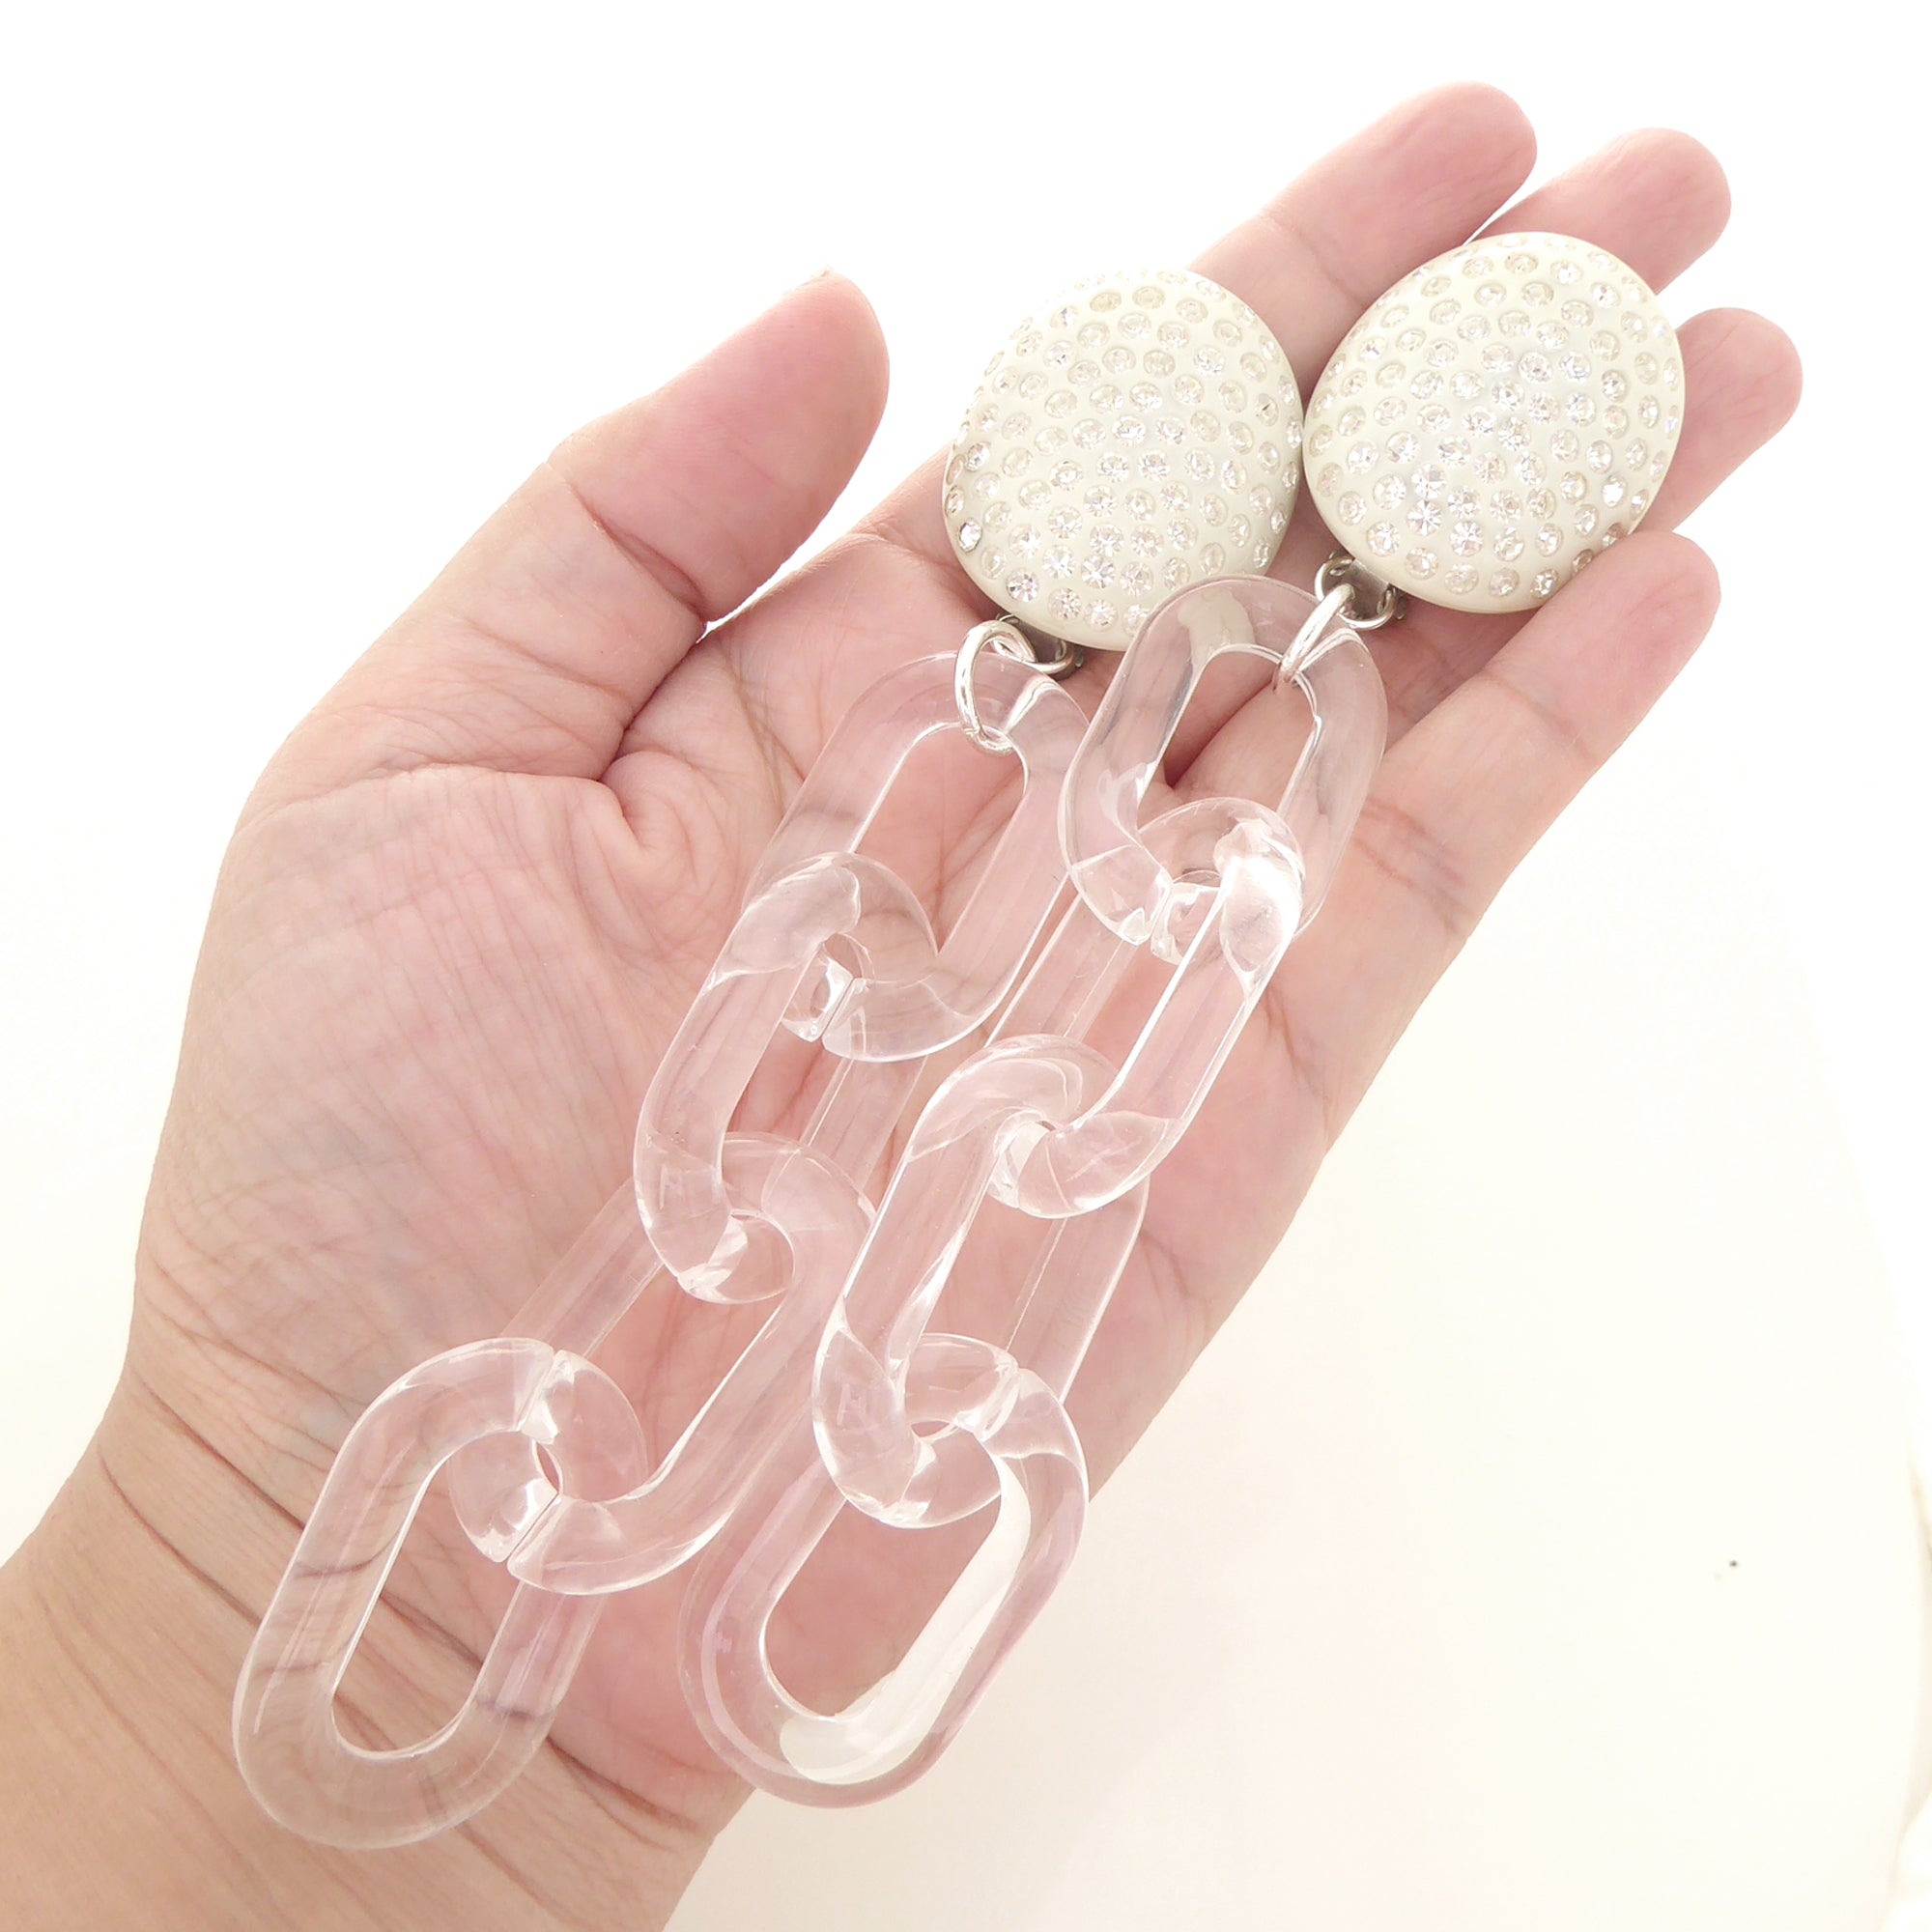 1960s Cream celluloid rhinestone and clear chain earrings by Jenny Dayco 7